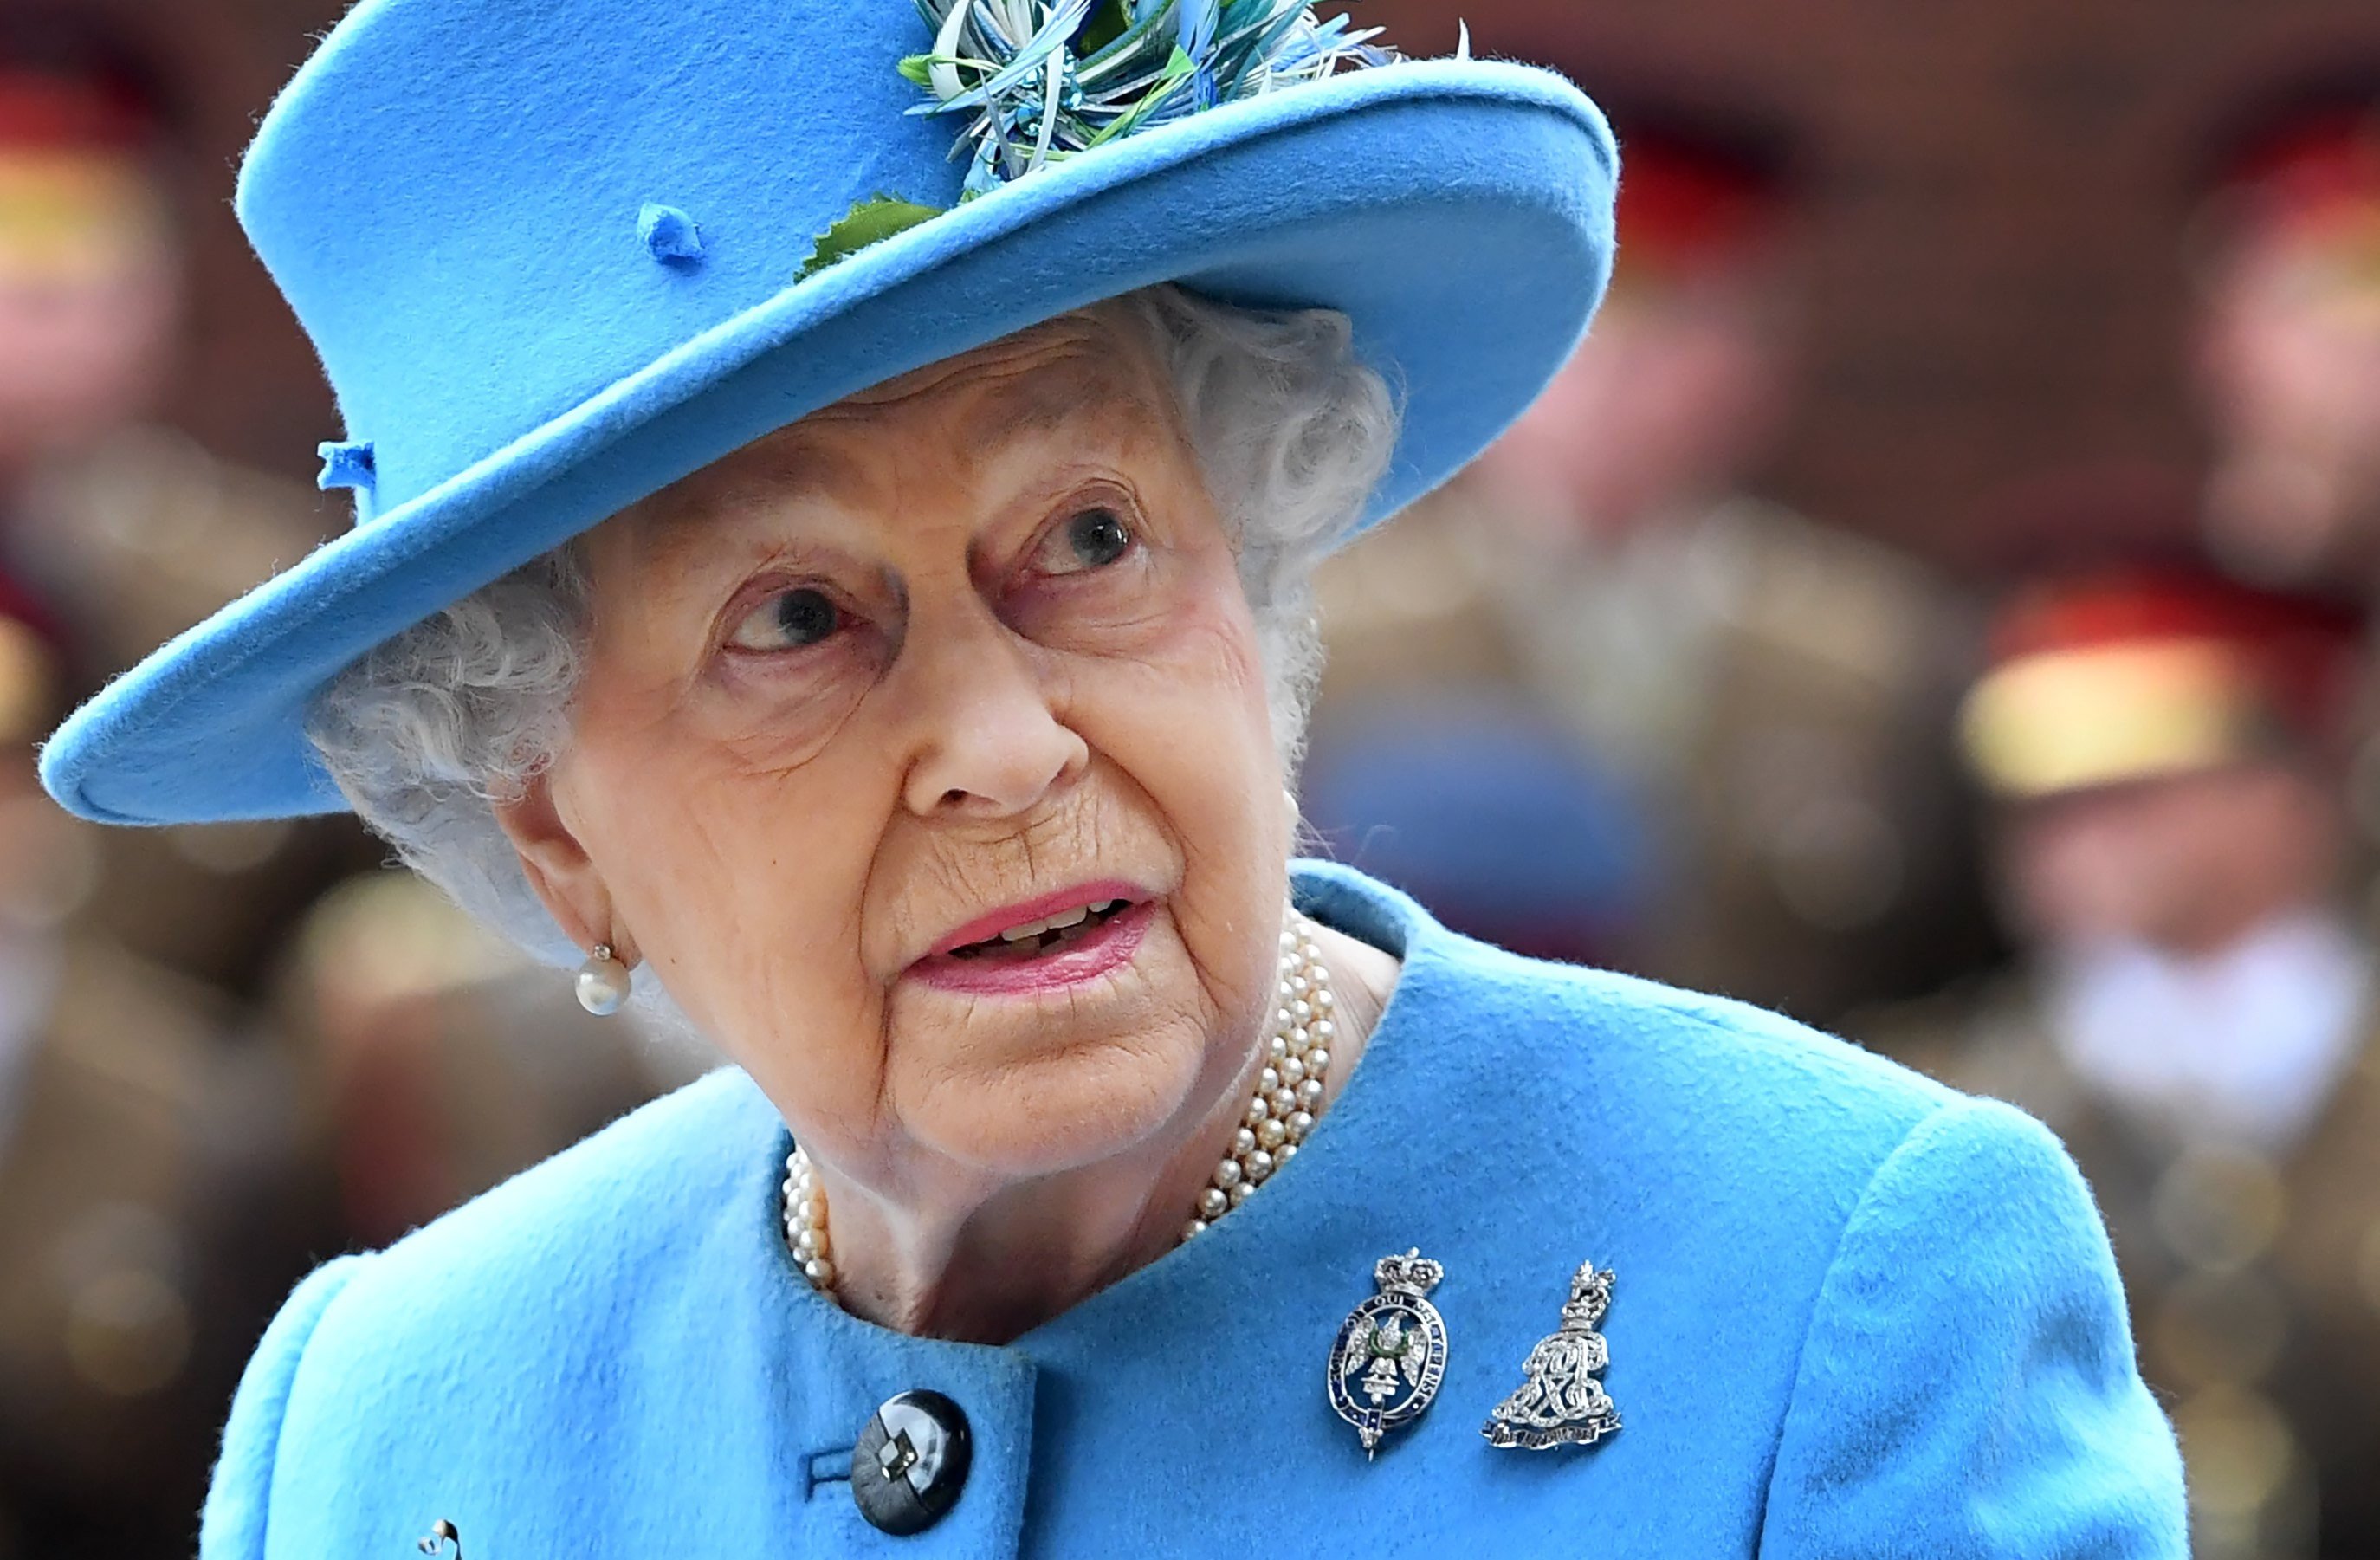 Media reports state that a leak of financial documents dubbed the Paradise Papers, contains 13.4 million documents has revealed how powerful and ultra-wealthy people, including the British Queen's private estate, managed by The Duchy of Lancaster, secretly invest vast amounts of cash in offshore tax havens. Photo: EPA